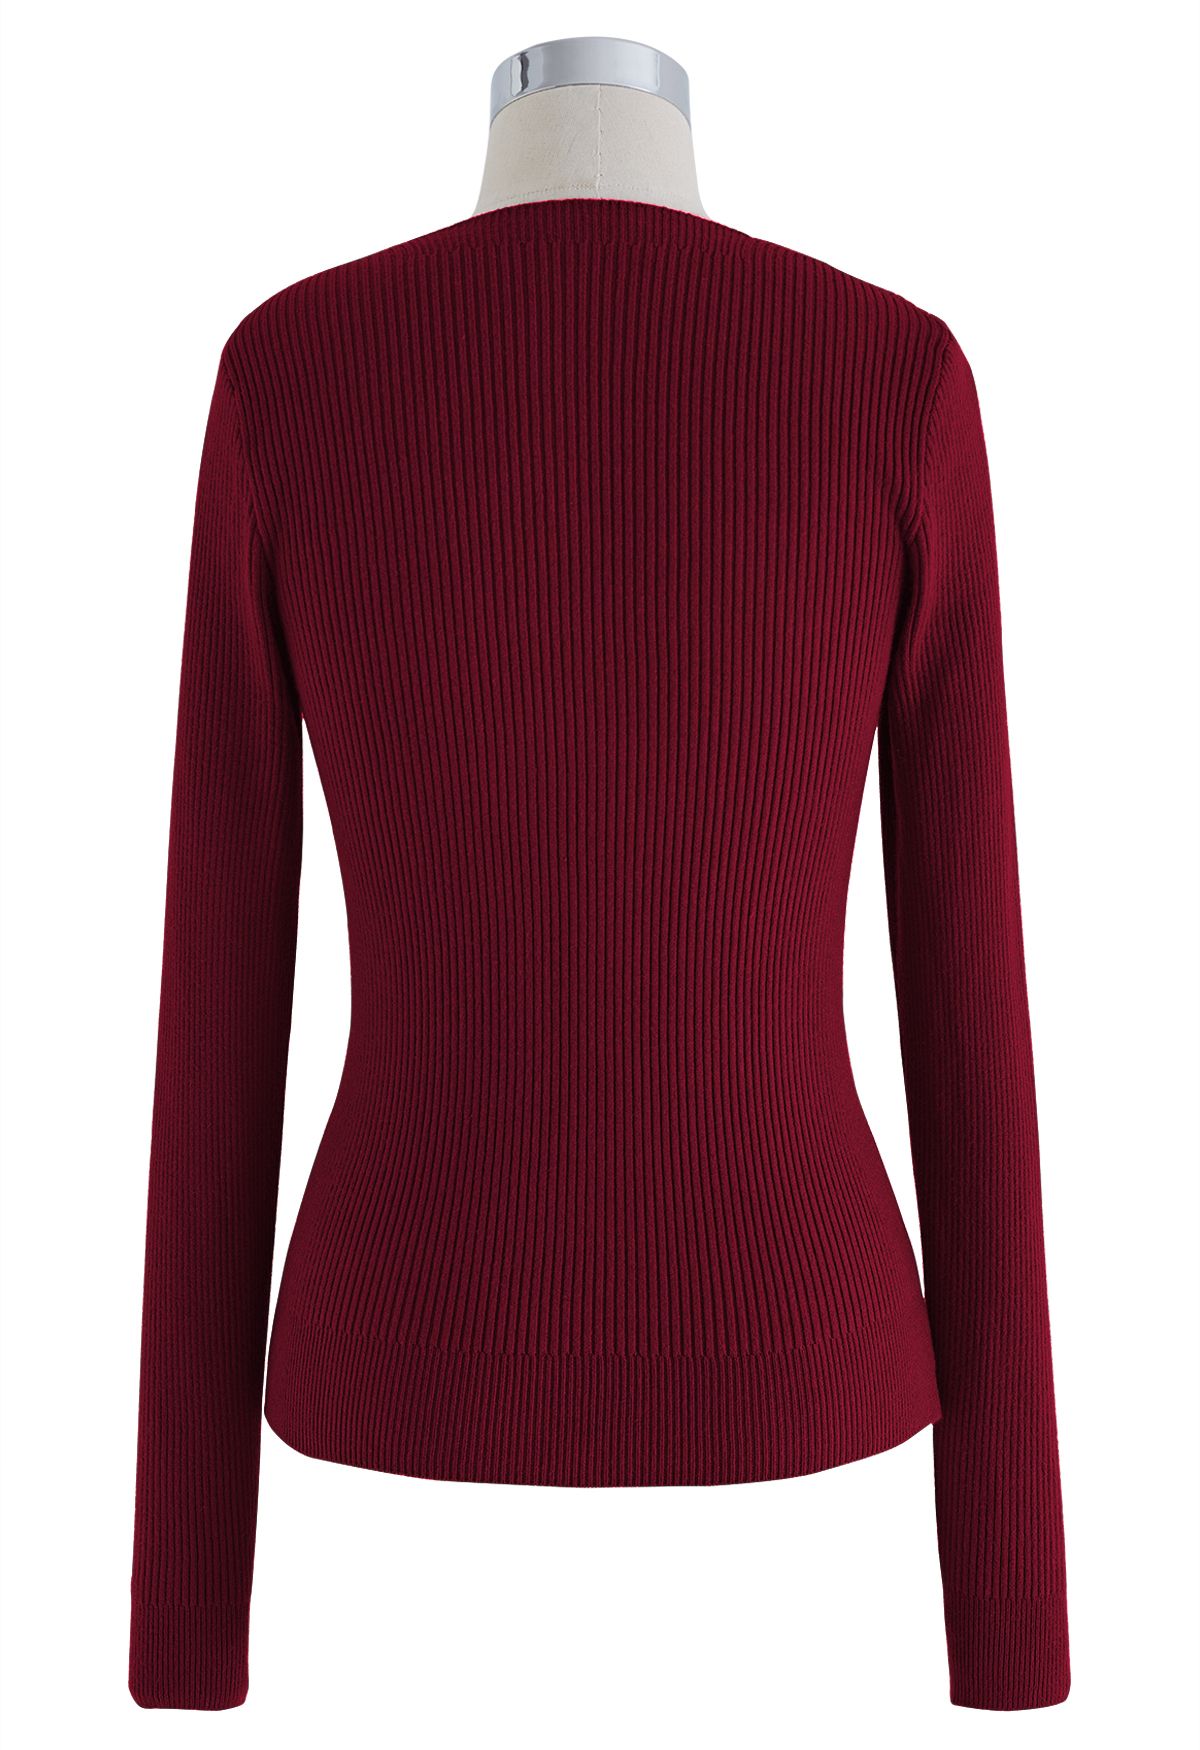 Sweetheart Twist Front Ribbed Knit Top in Burgundy